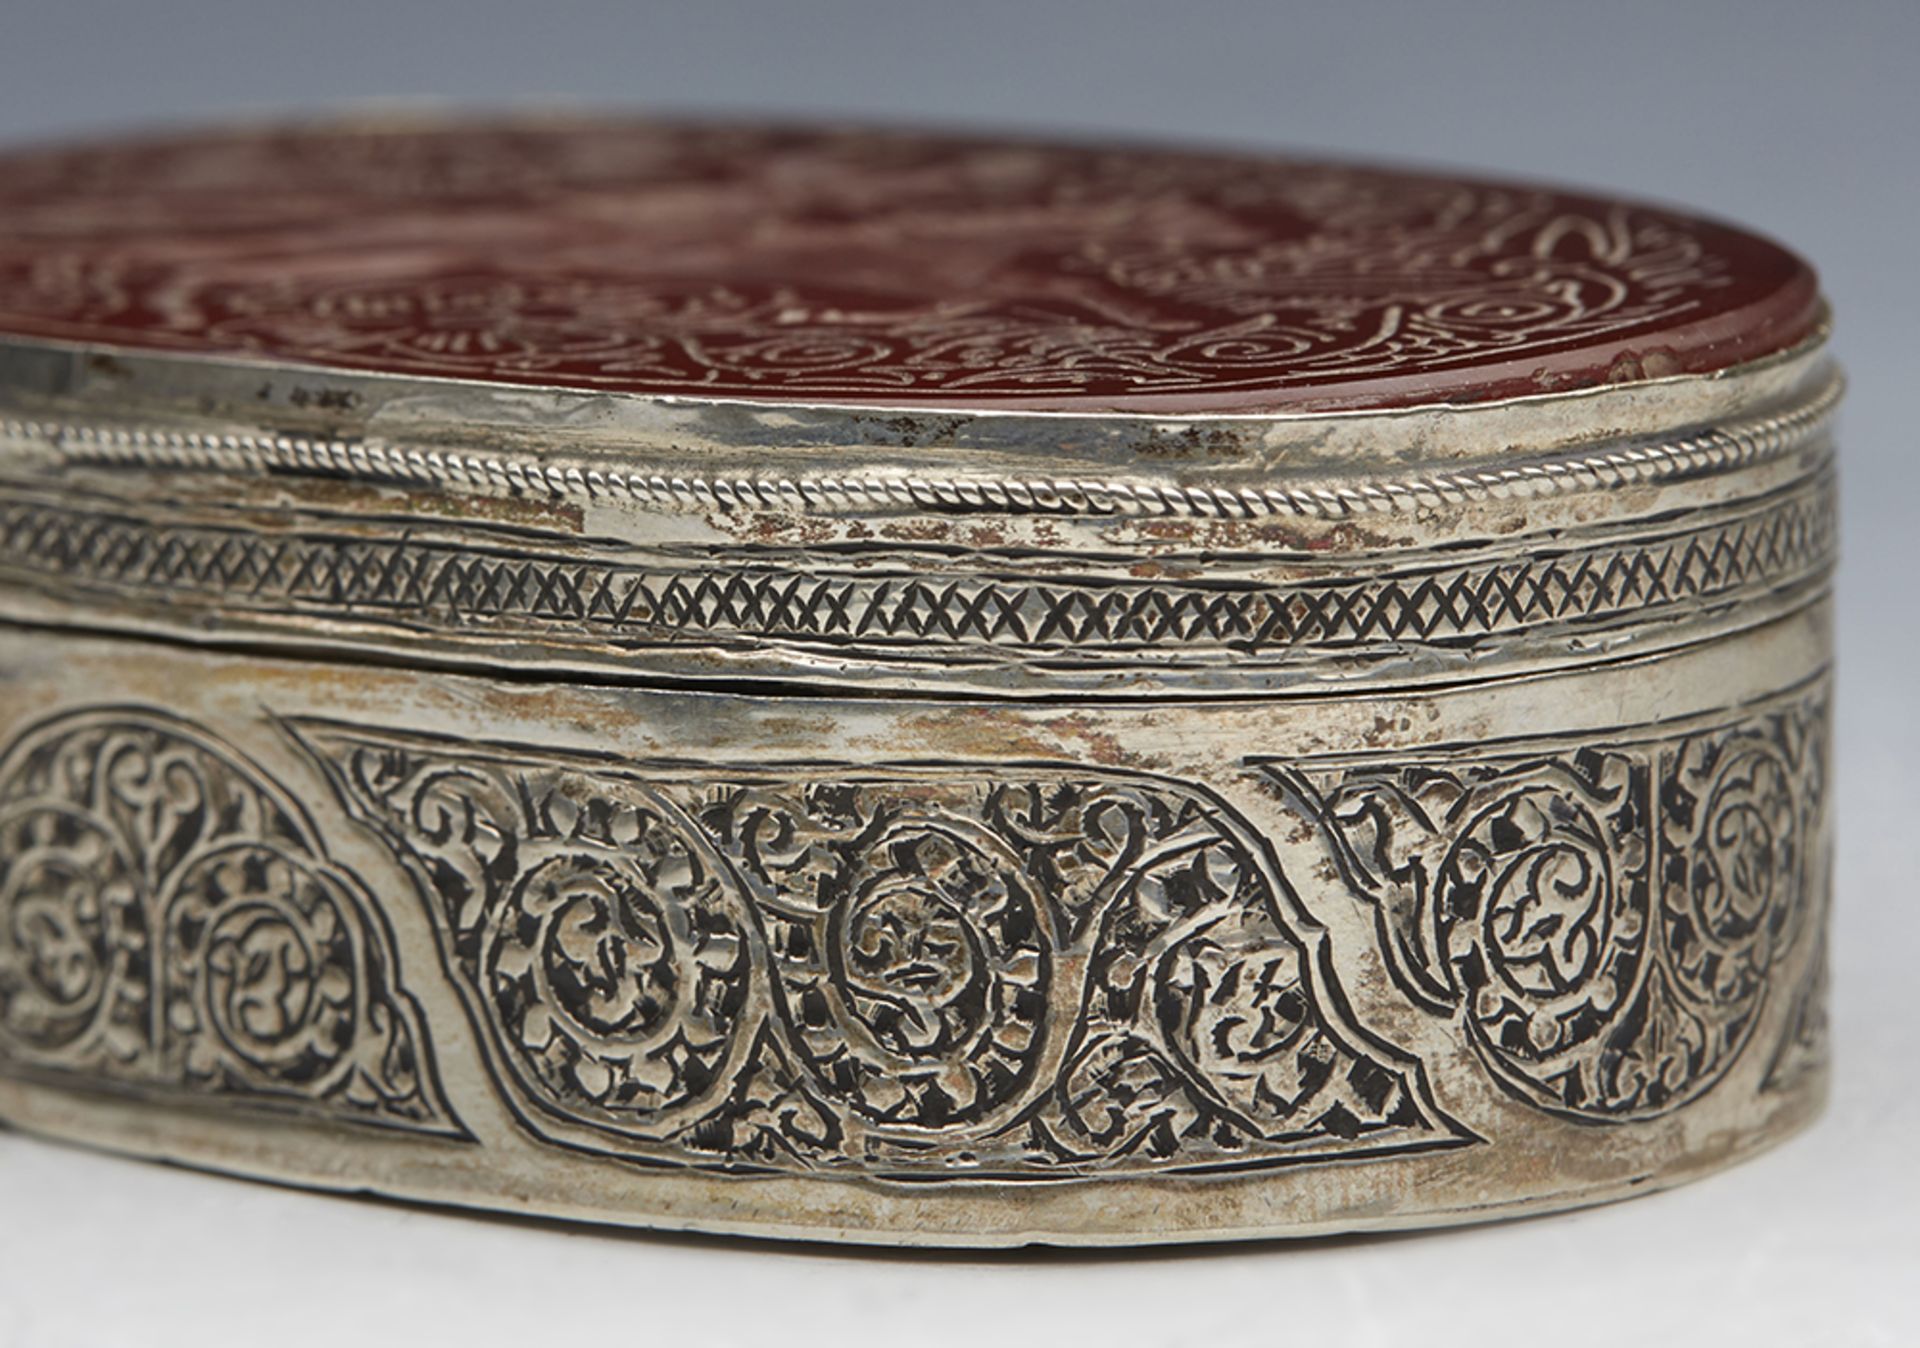 Antique Indian Silver Lidded Box With Carved Intaglio Stone Top 19Th C. - Image 4 of 7